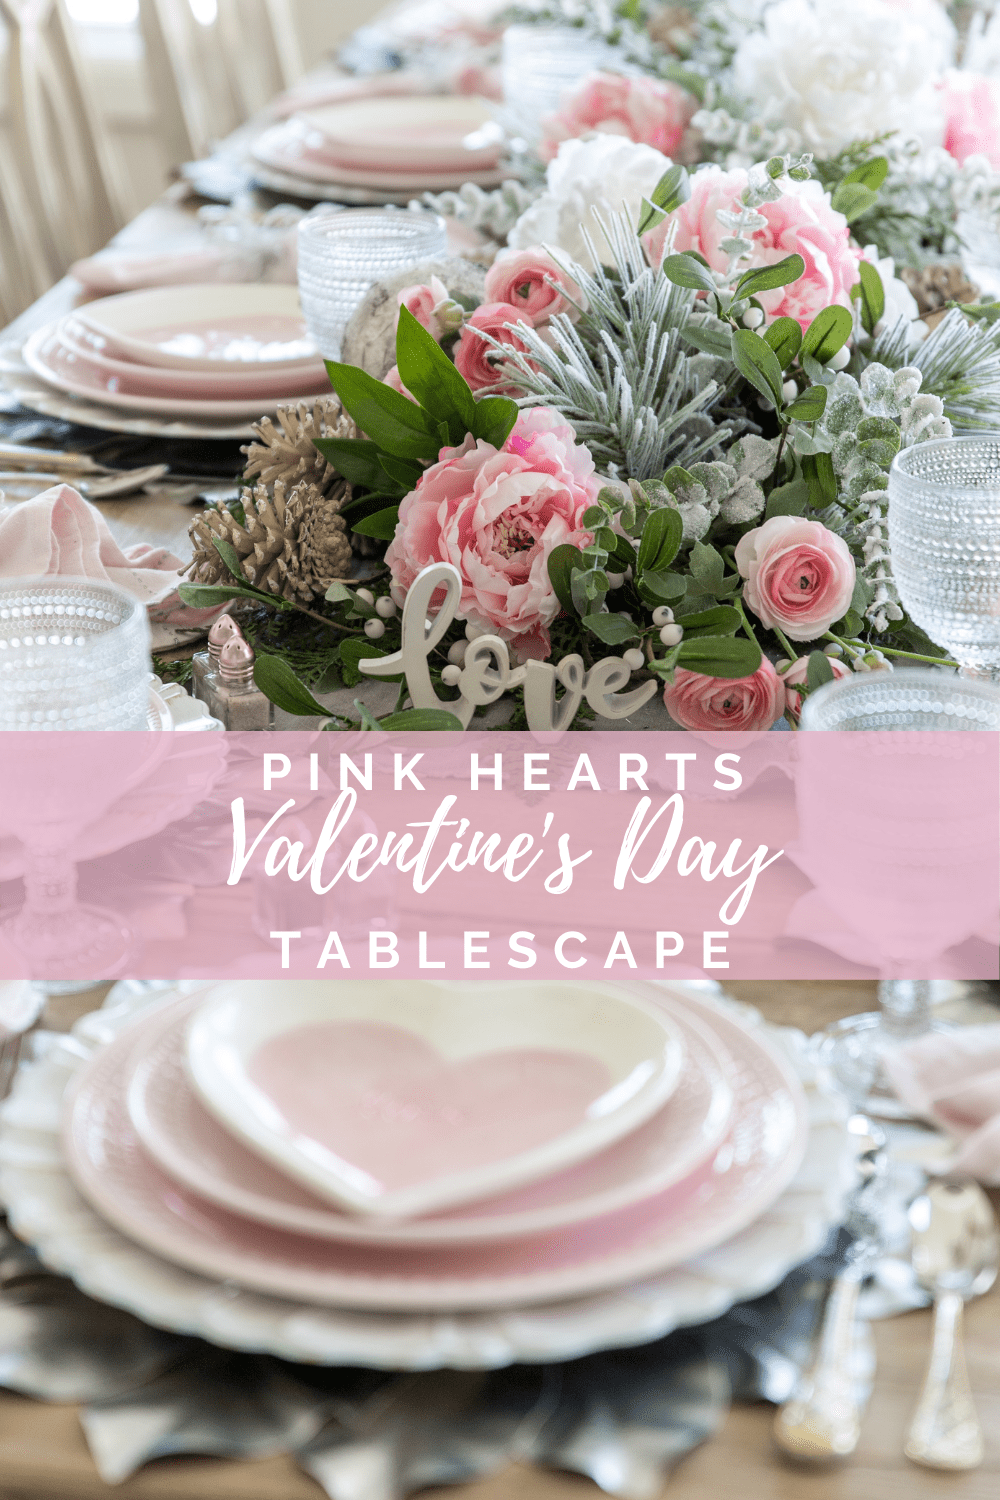 Sharing my festive pink hearts valentines day tablescape for a beautiful Valentines or Galentines Day celebration